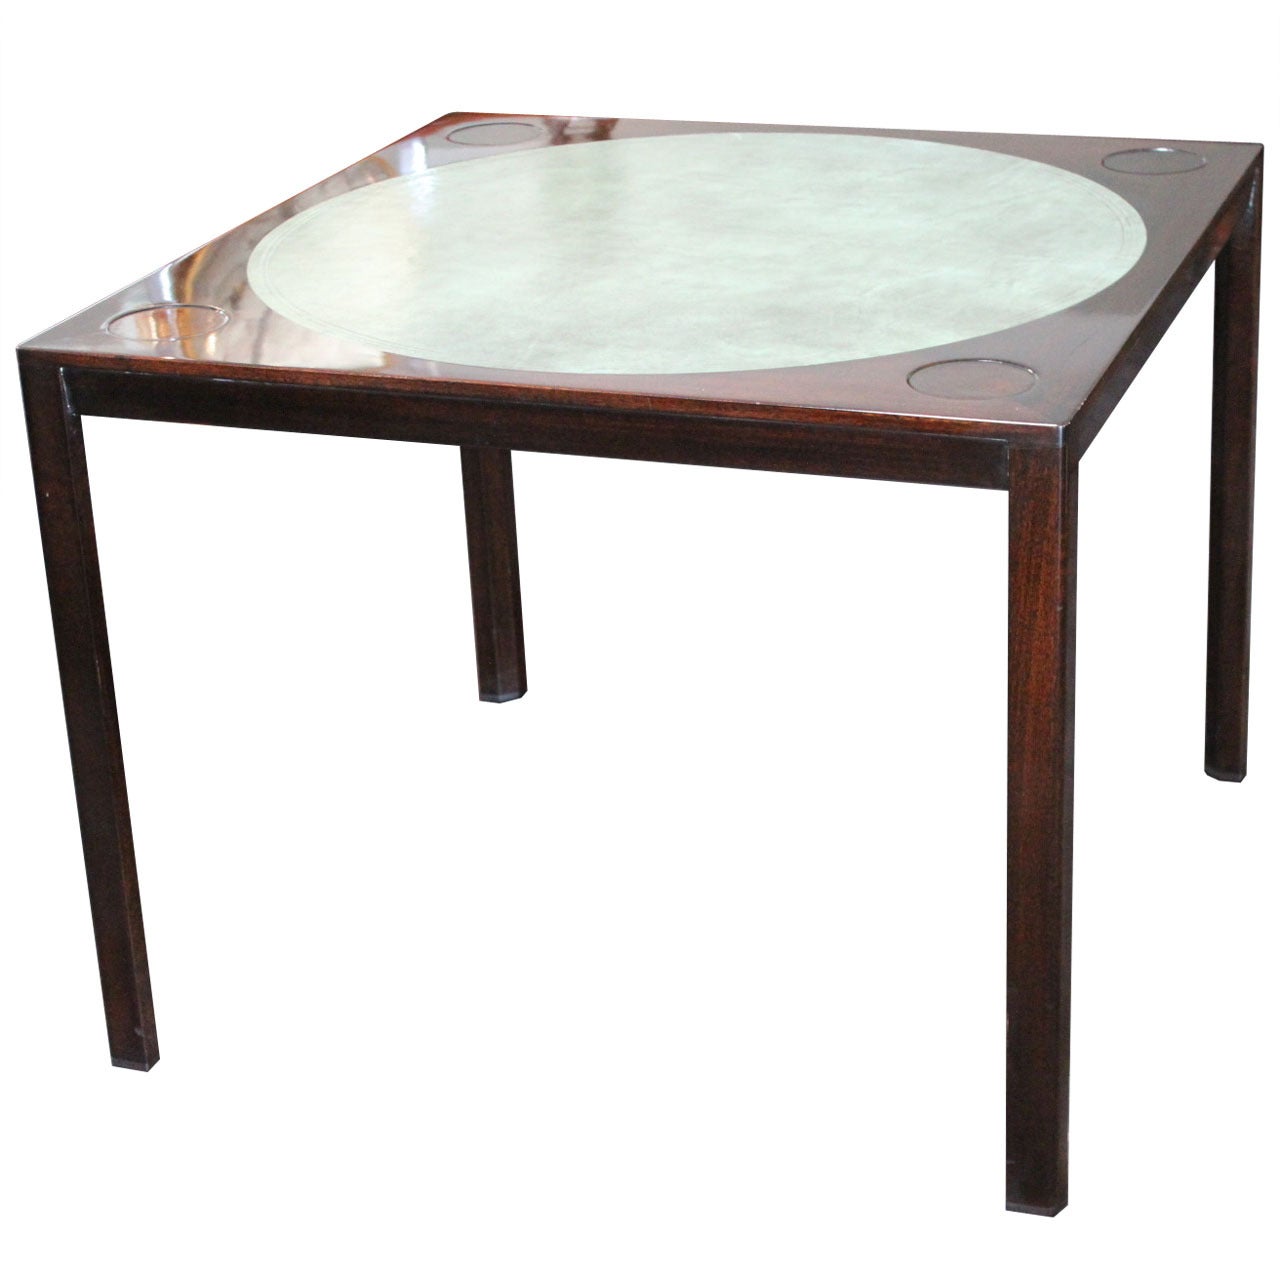 Game Table With Leather Insert By Edward Wormley For Dunbar